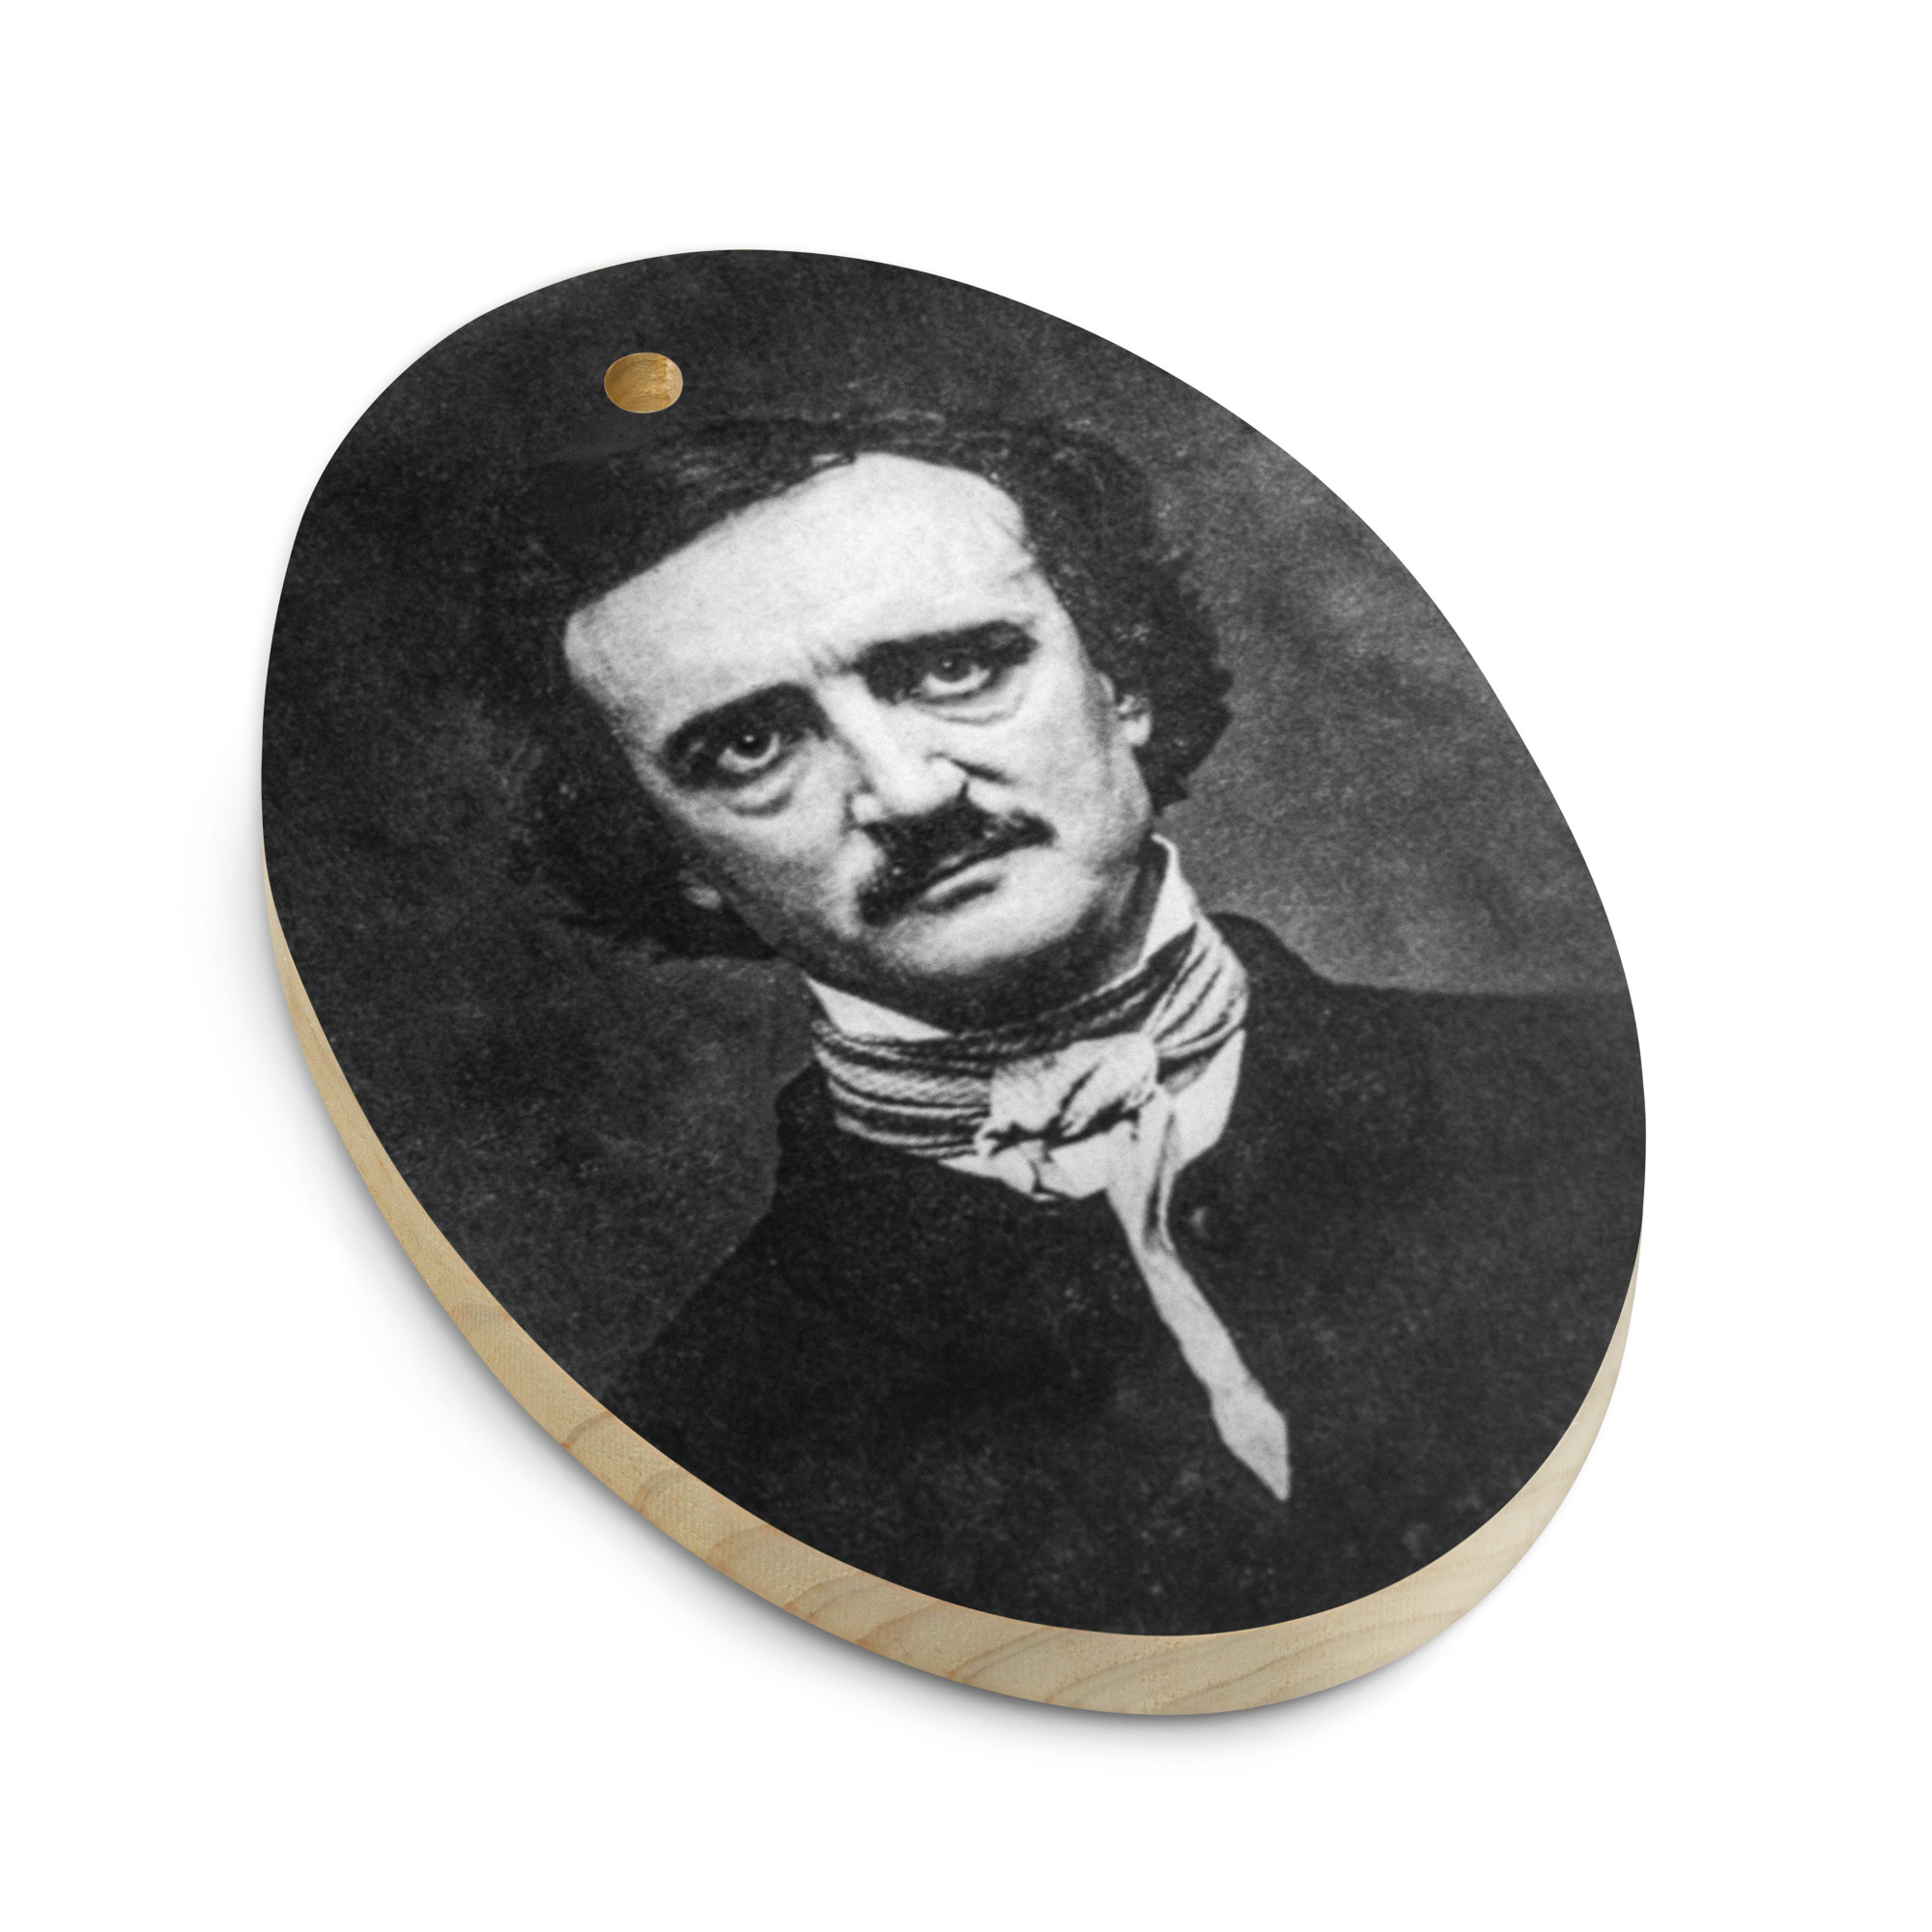 Featured image for “Edgar Allan Poe - Wooden ornament”